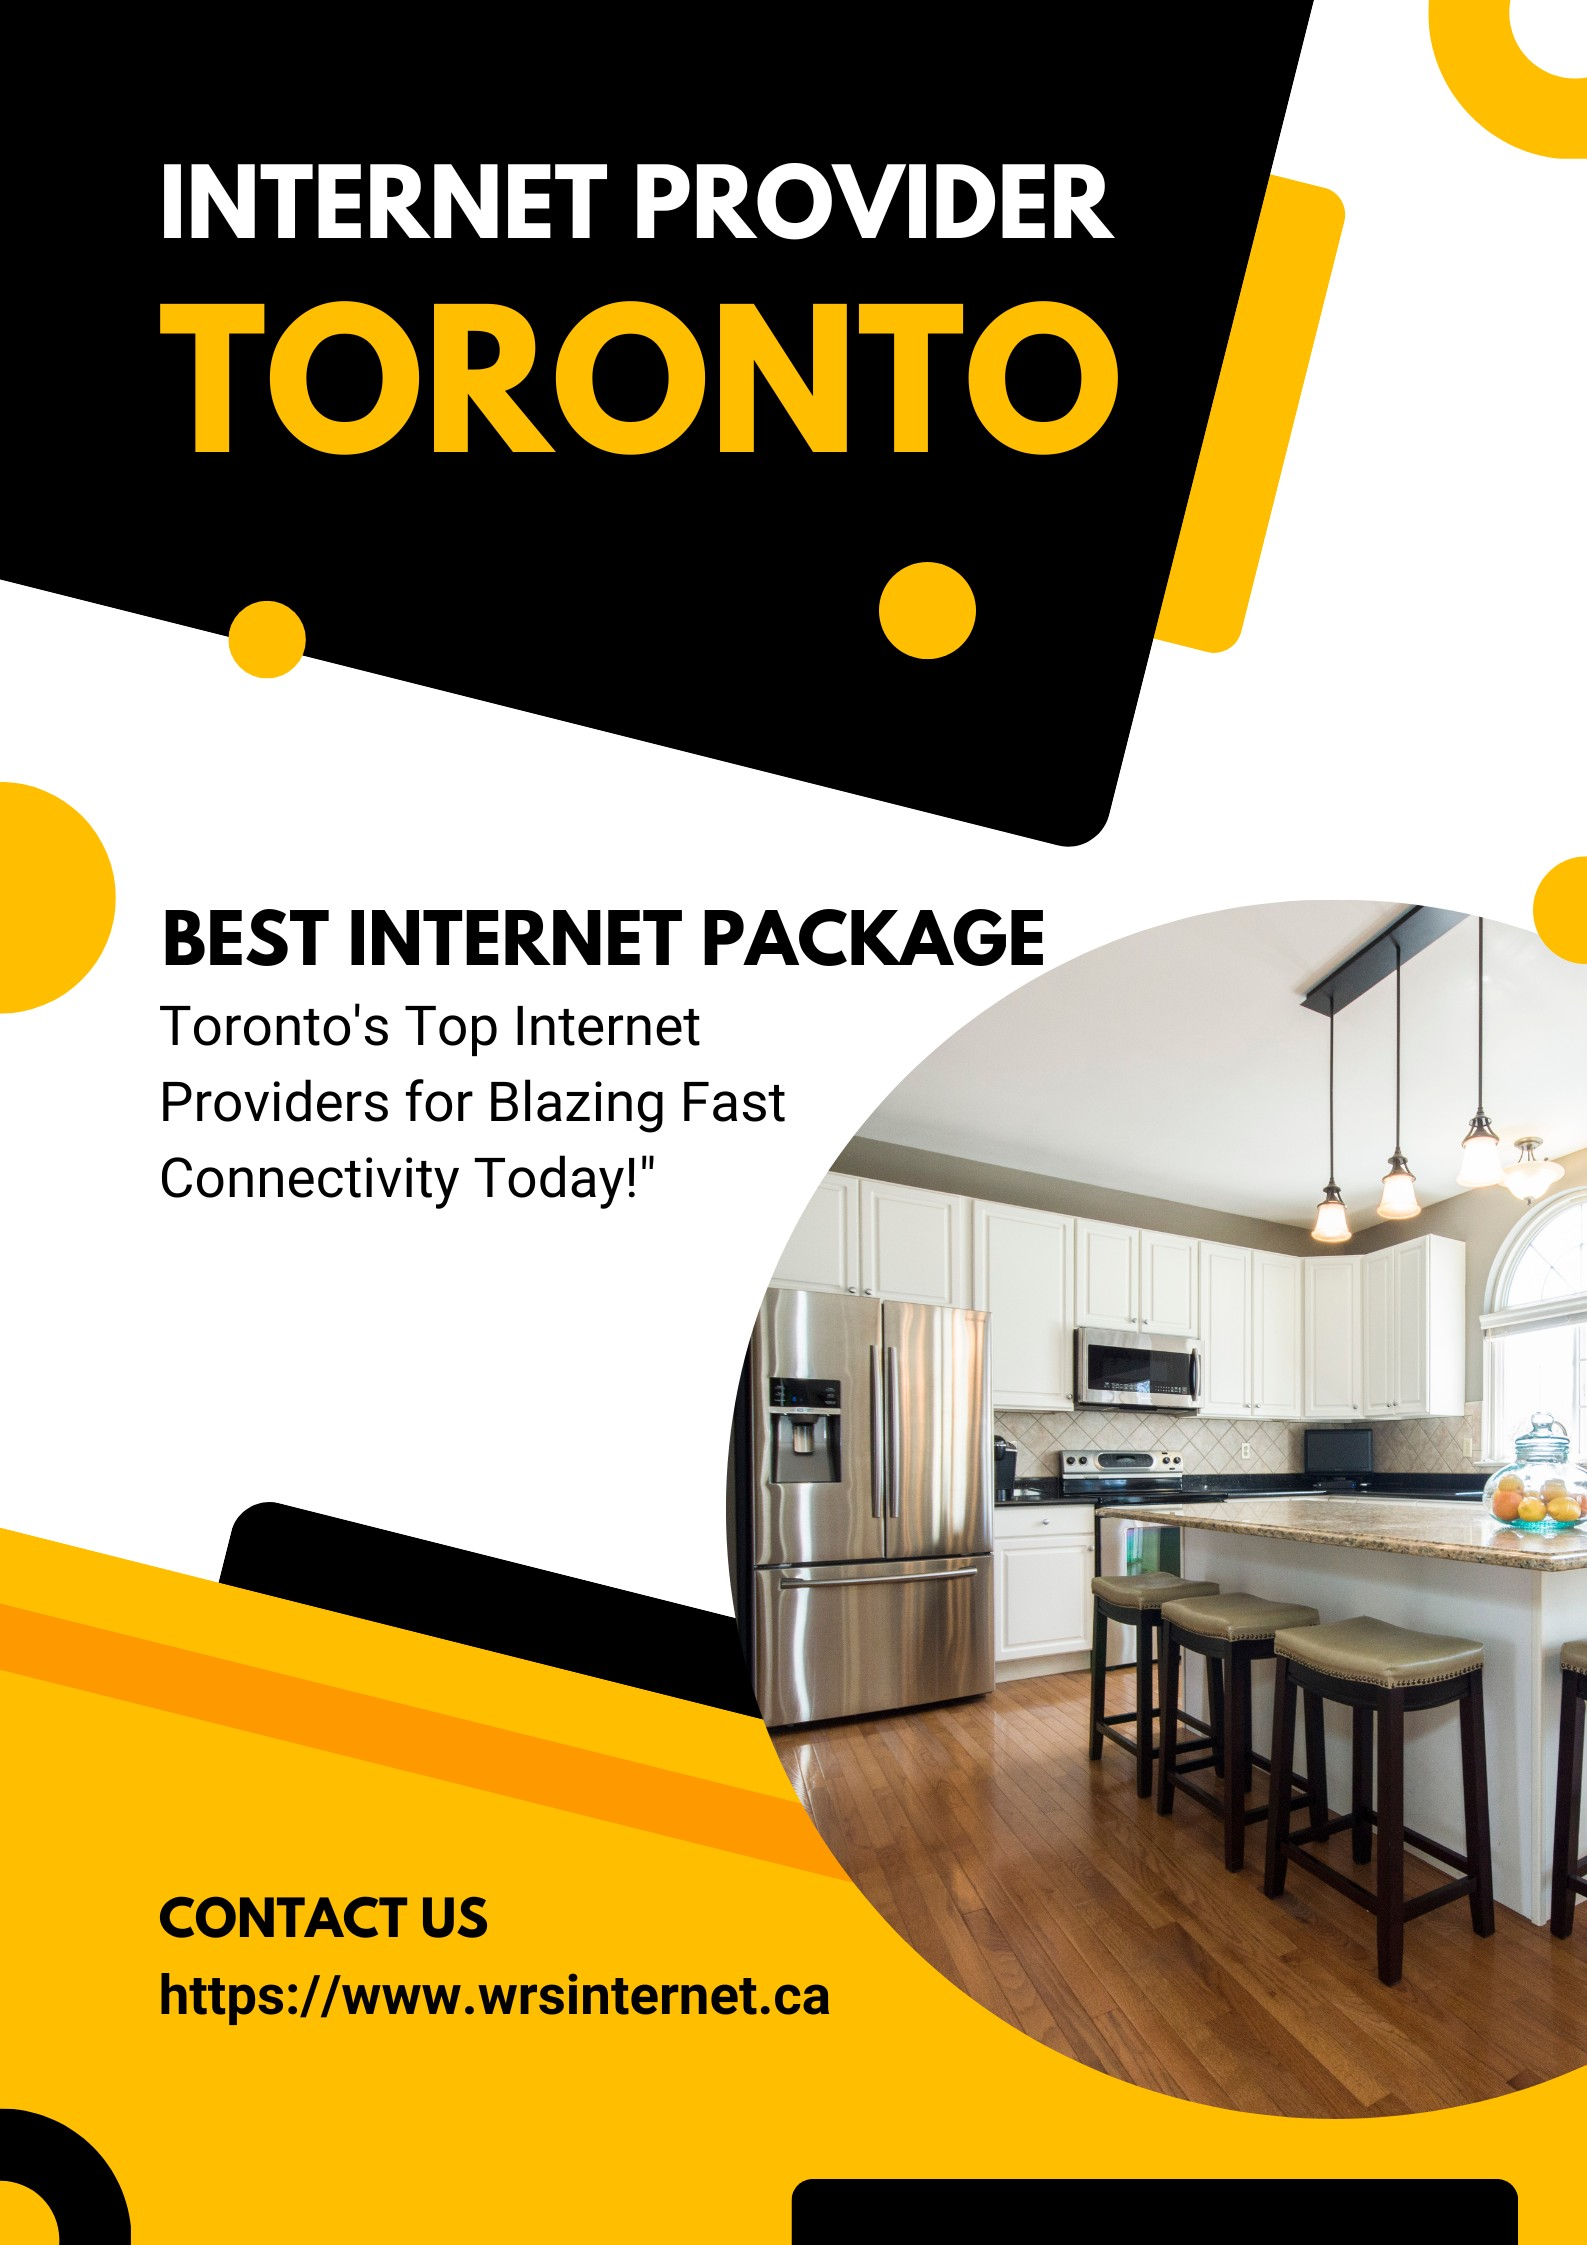 Connecting Toronto: A Digital Landscape of Internet Services and Connectivity